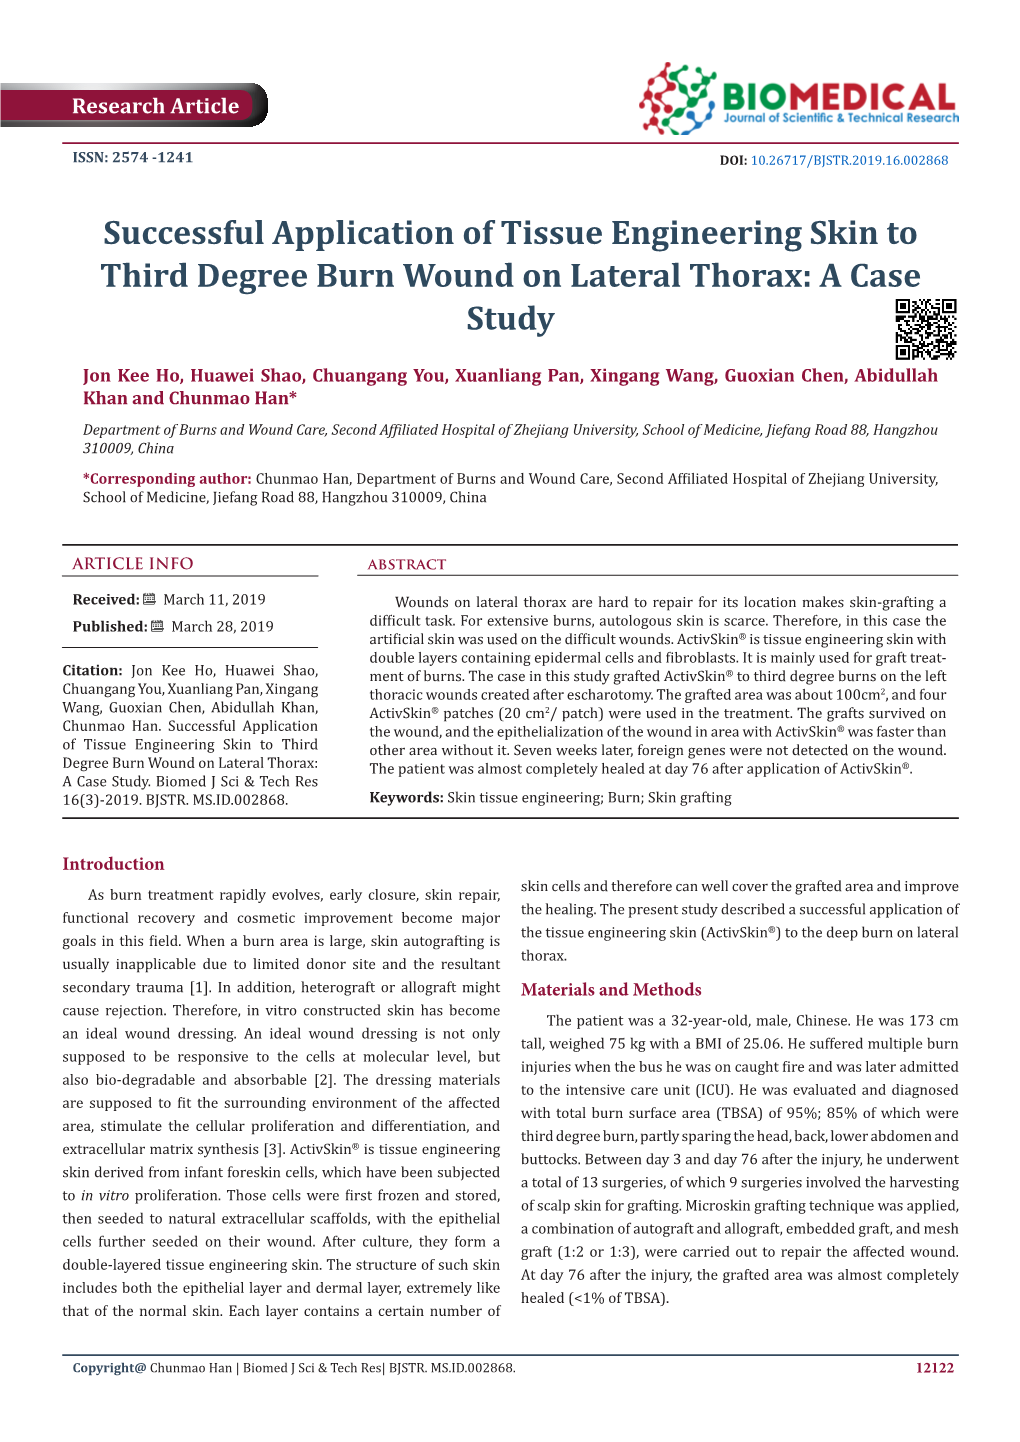 Successful Application of Tissue Engineering Skin to Third Degree Burn Wound on Lateral Thorax: a Case Study